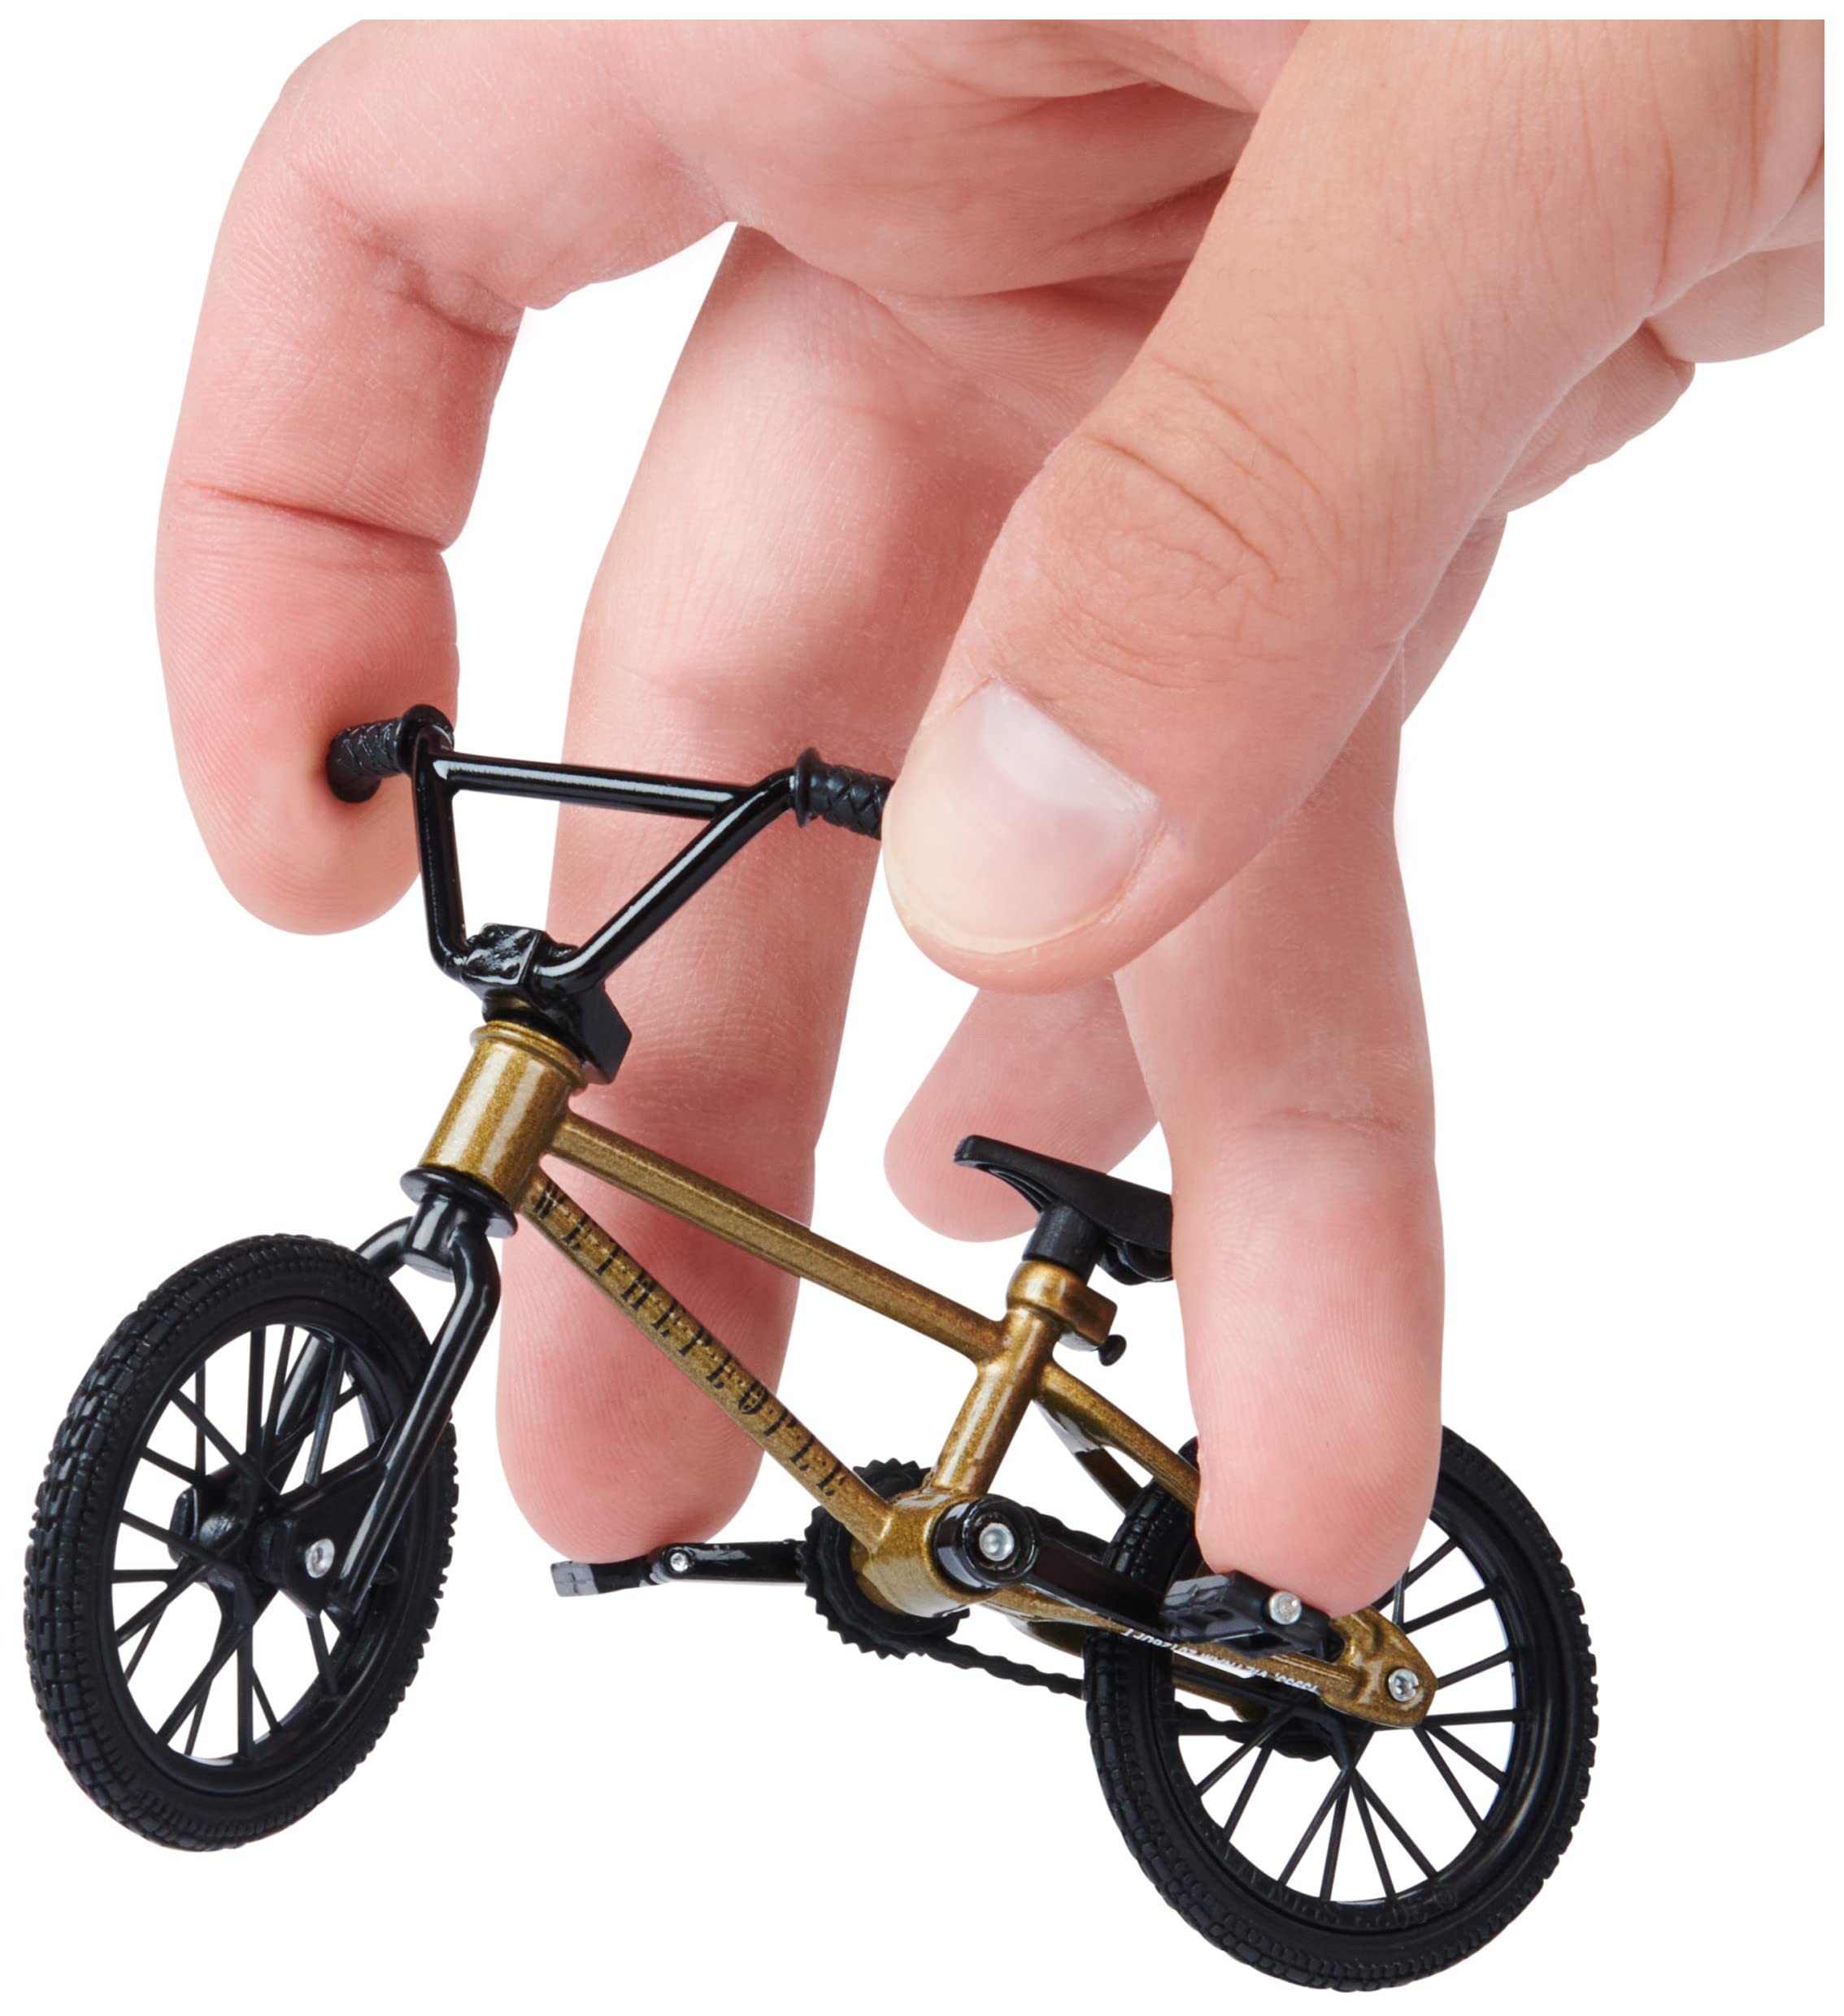 TECH DECK, BMX Finger Bike 3-Pack, Collectible and Customizable Mini BMX Bicycle Toys for Collectors, Kids Toys Ages 6 and Up (Amazon Exclusive)